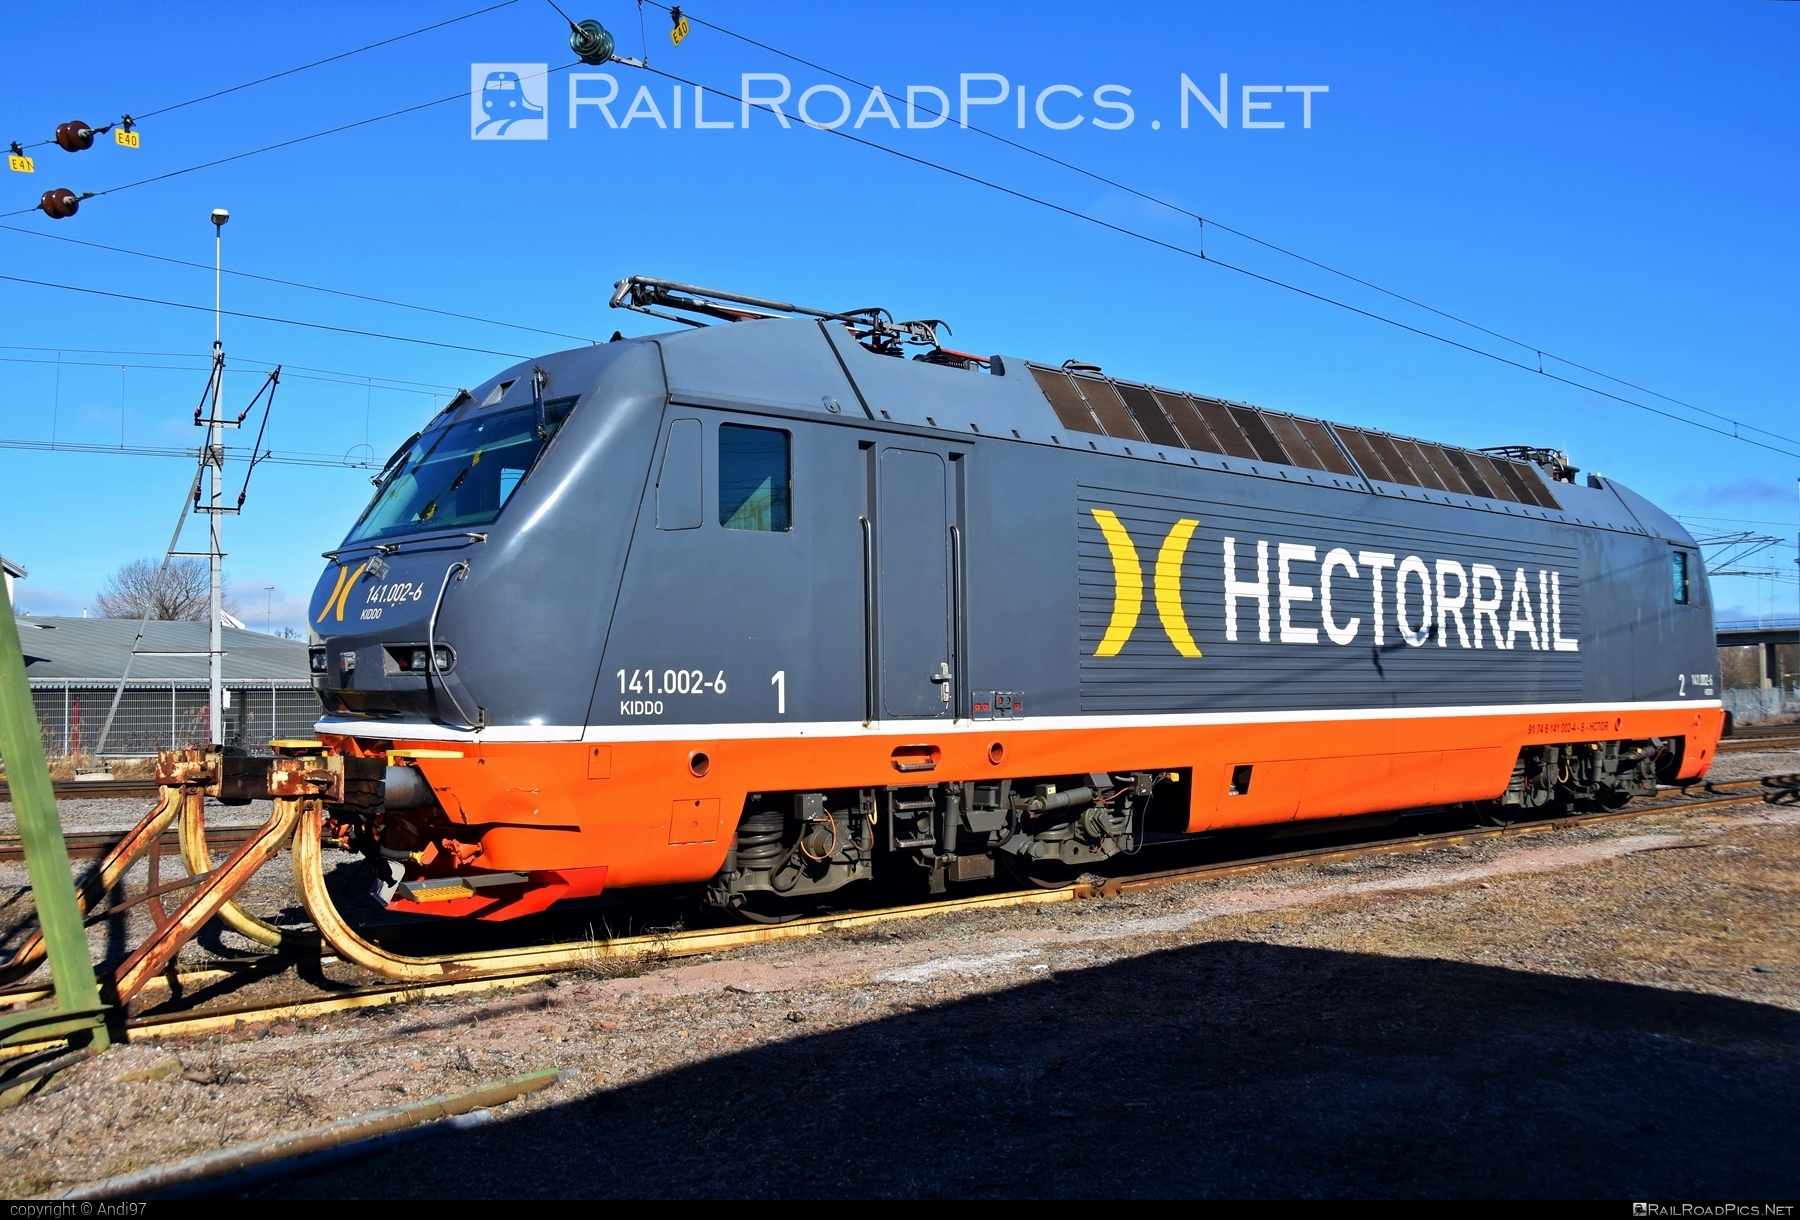 ÖBB Class 1012 - 141 002-6 operated by Hector Rail AB #hectorRail #hectorRailAB #obbClass1012